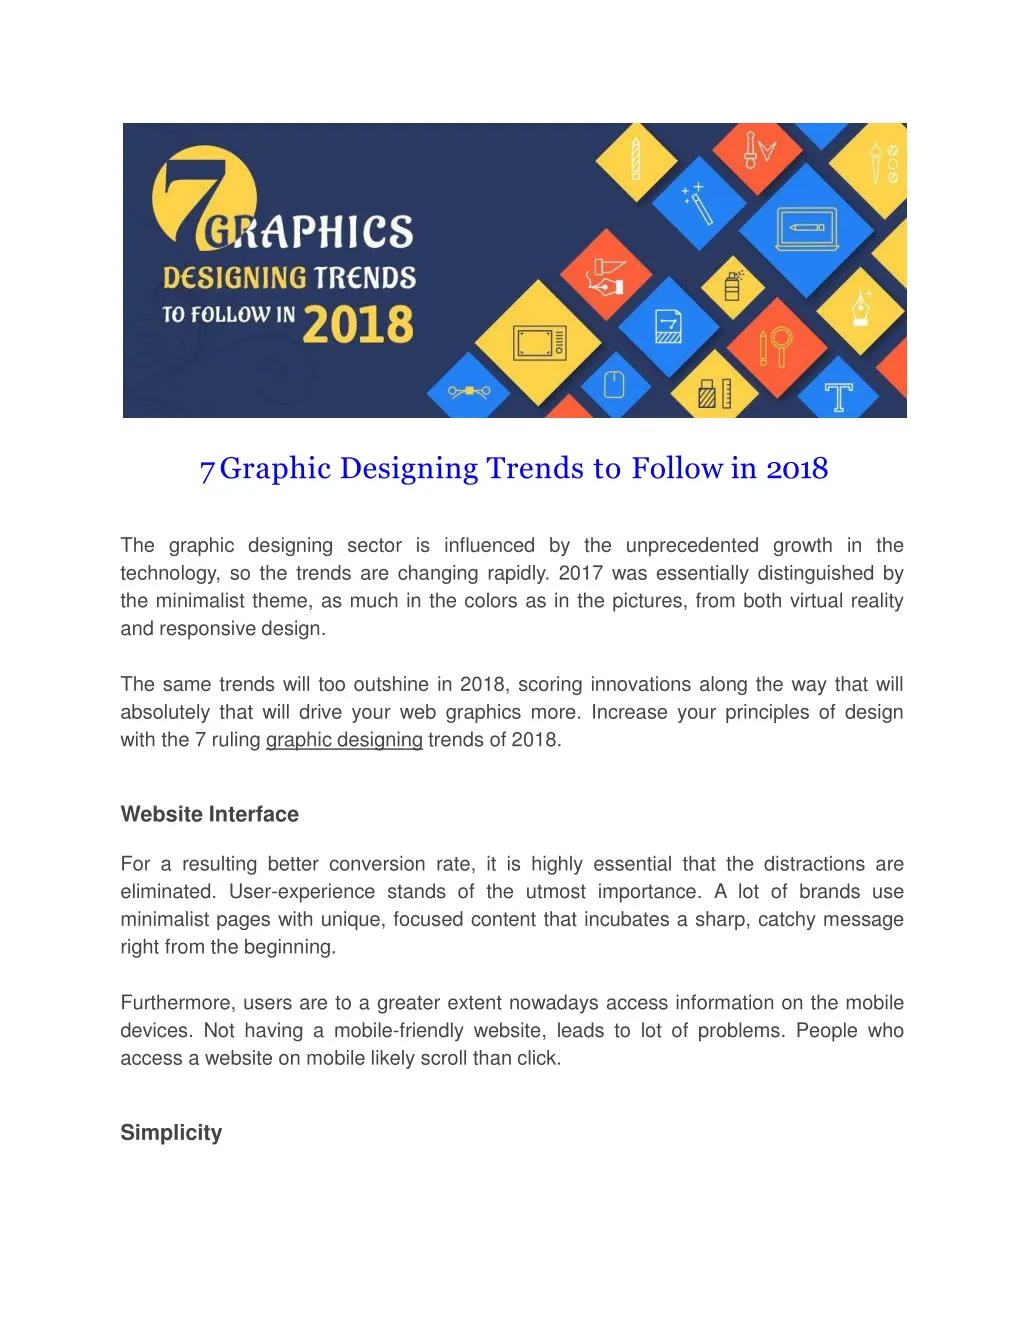 7 graphic designing trends to follow in 2018